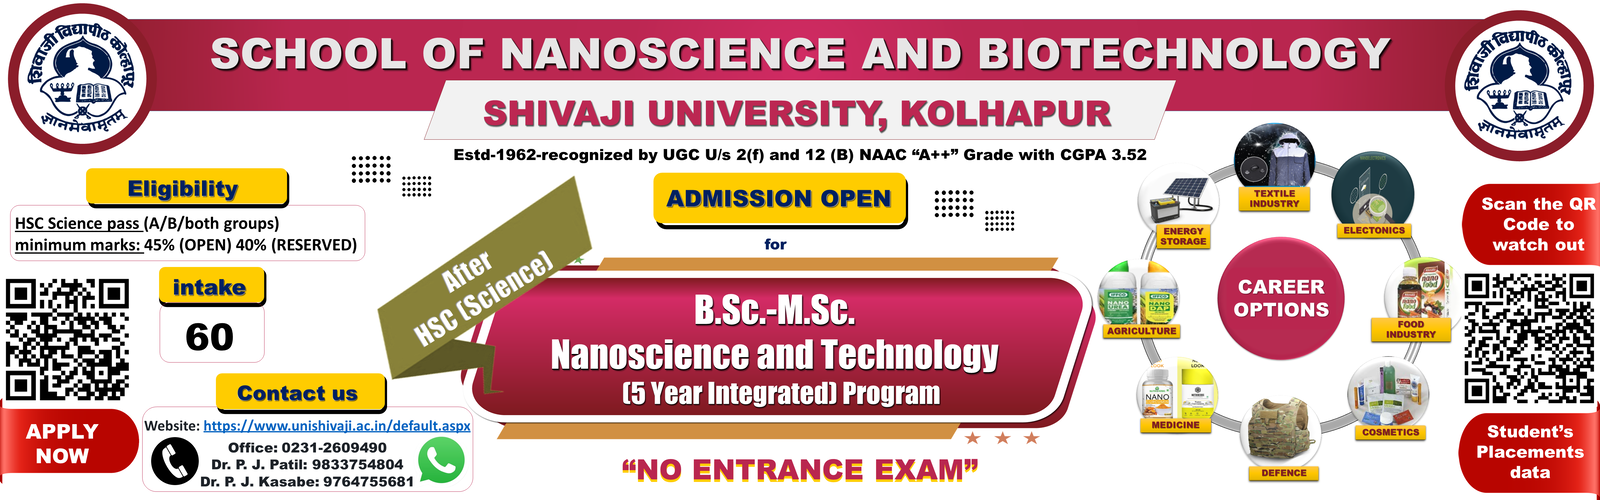 SCHOOL OF NANOSCIENCE AND TECHNOLOGY Banner